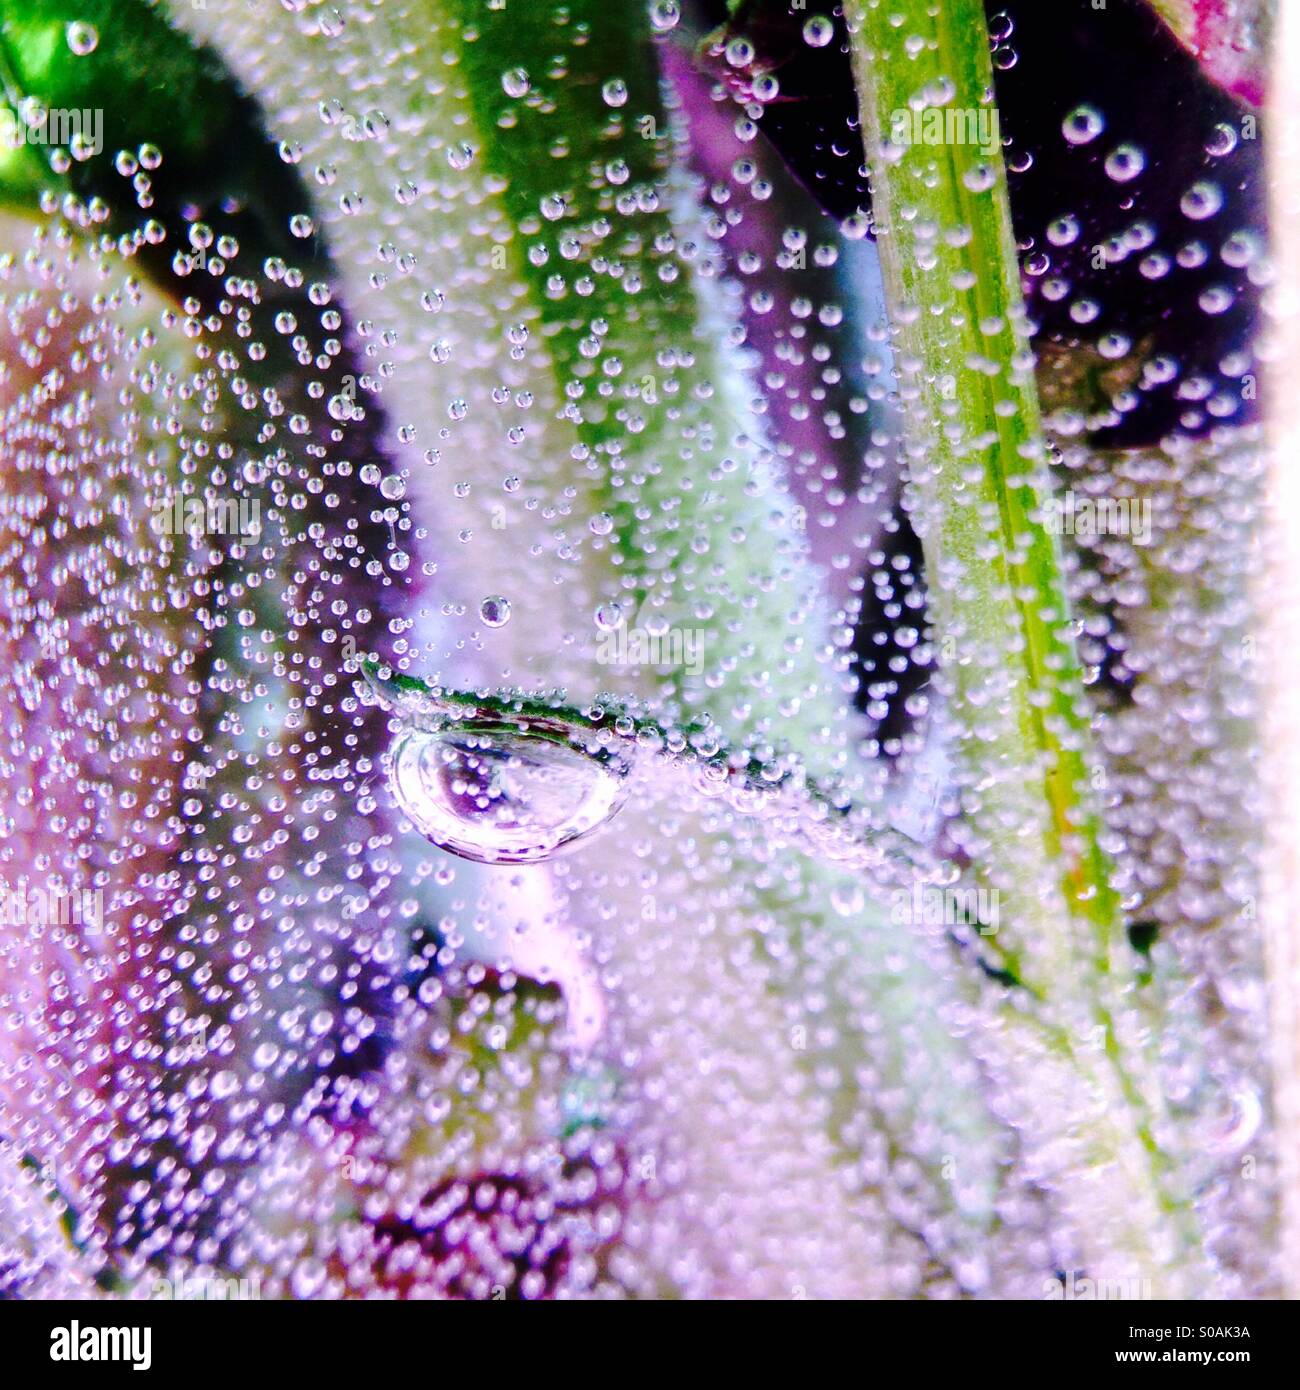 Bubbles on flower stems in a vase Stock Photo